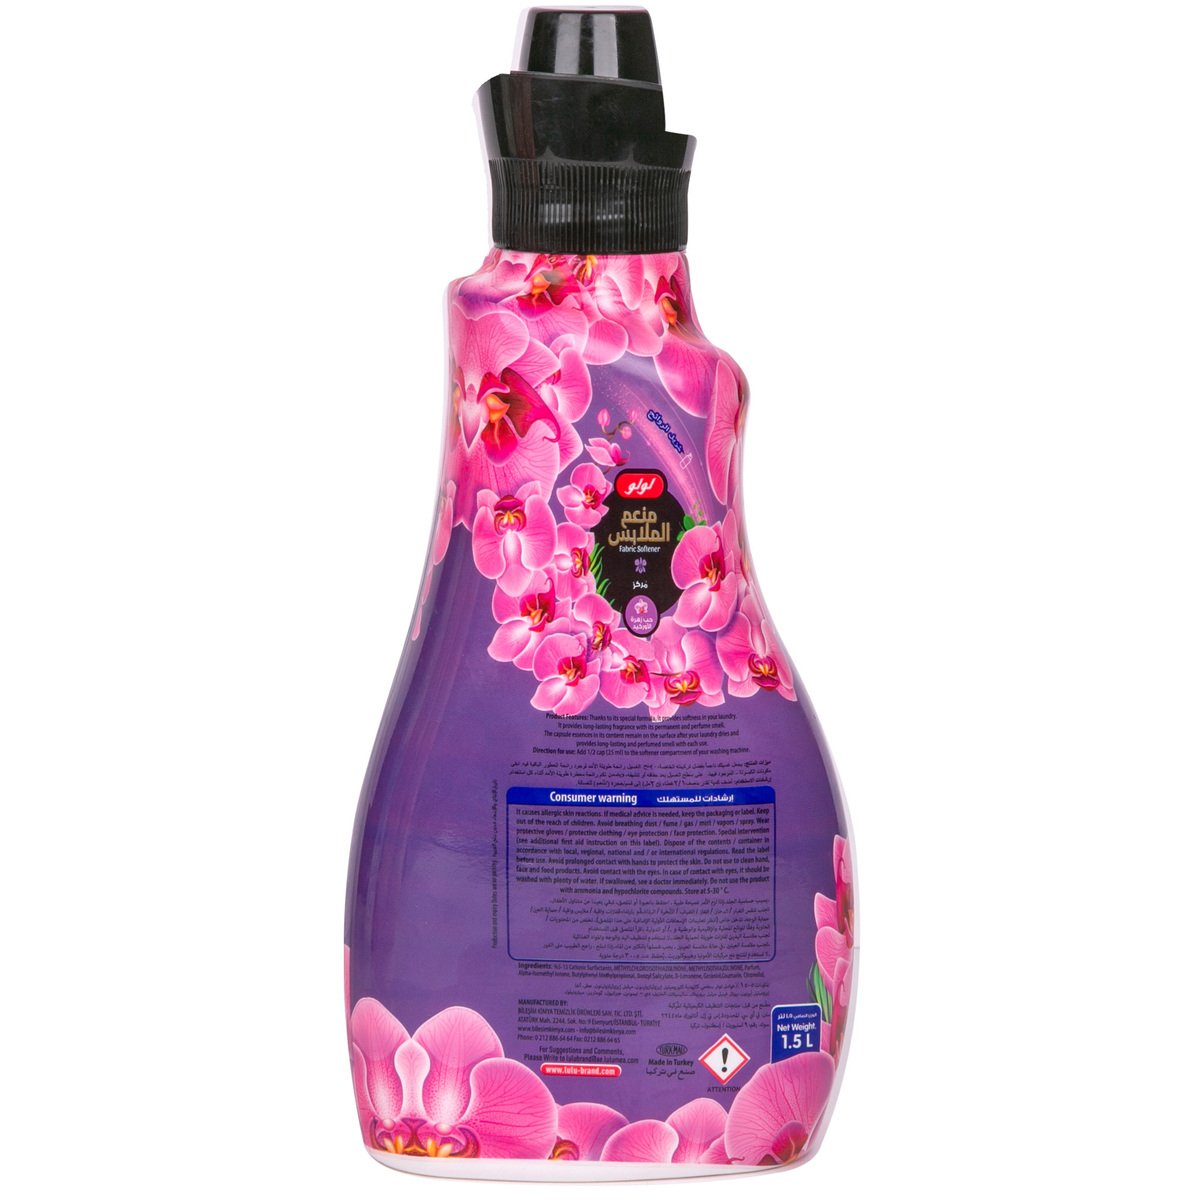 LuLu Concentrated Fabric Softener Love of Orchid 1.5Litre